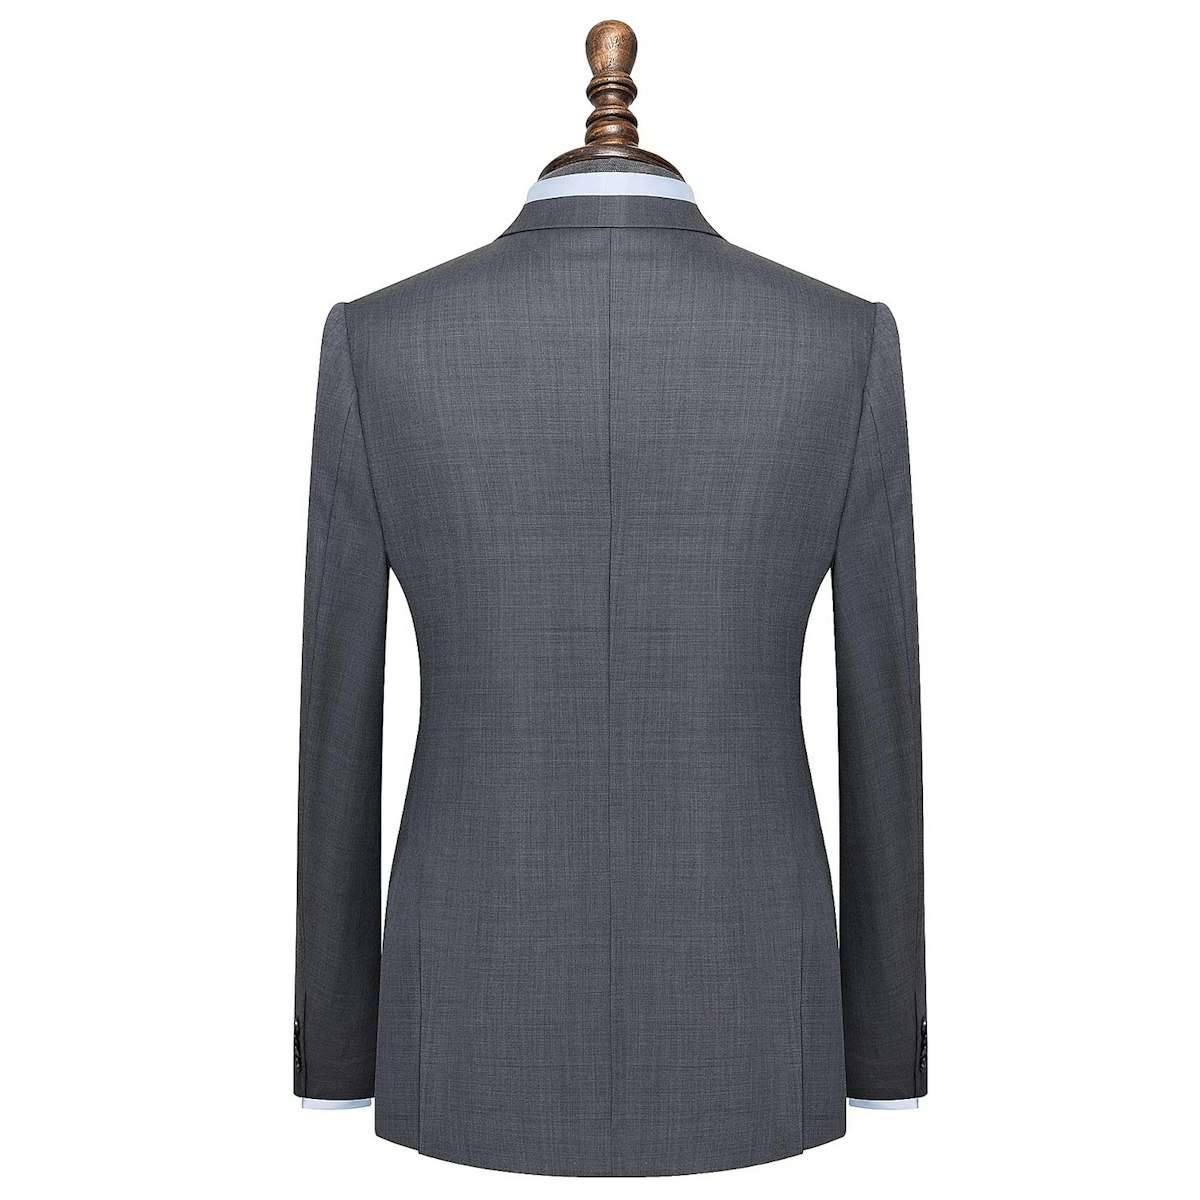 InStitchu Collection Belview Grey Wool Jacket